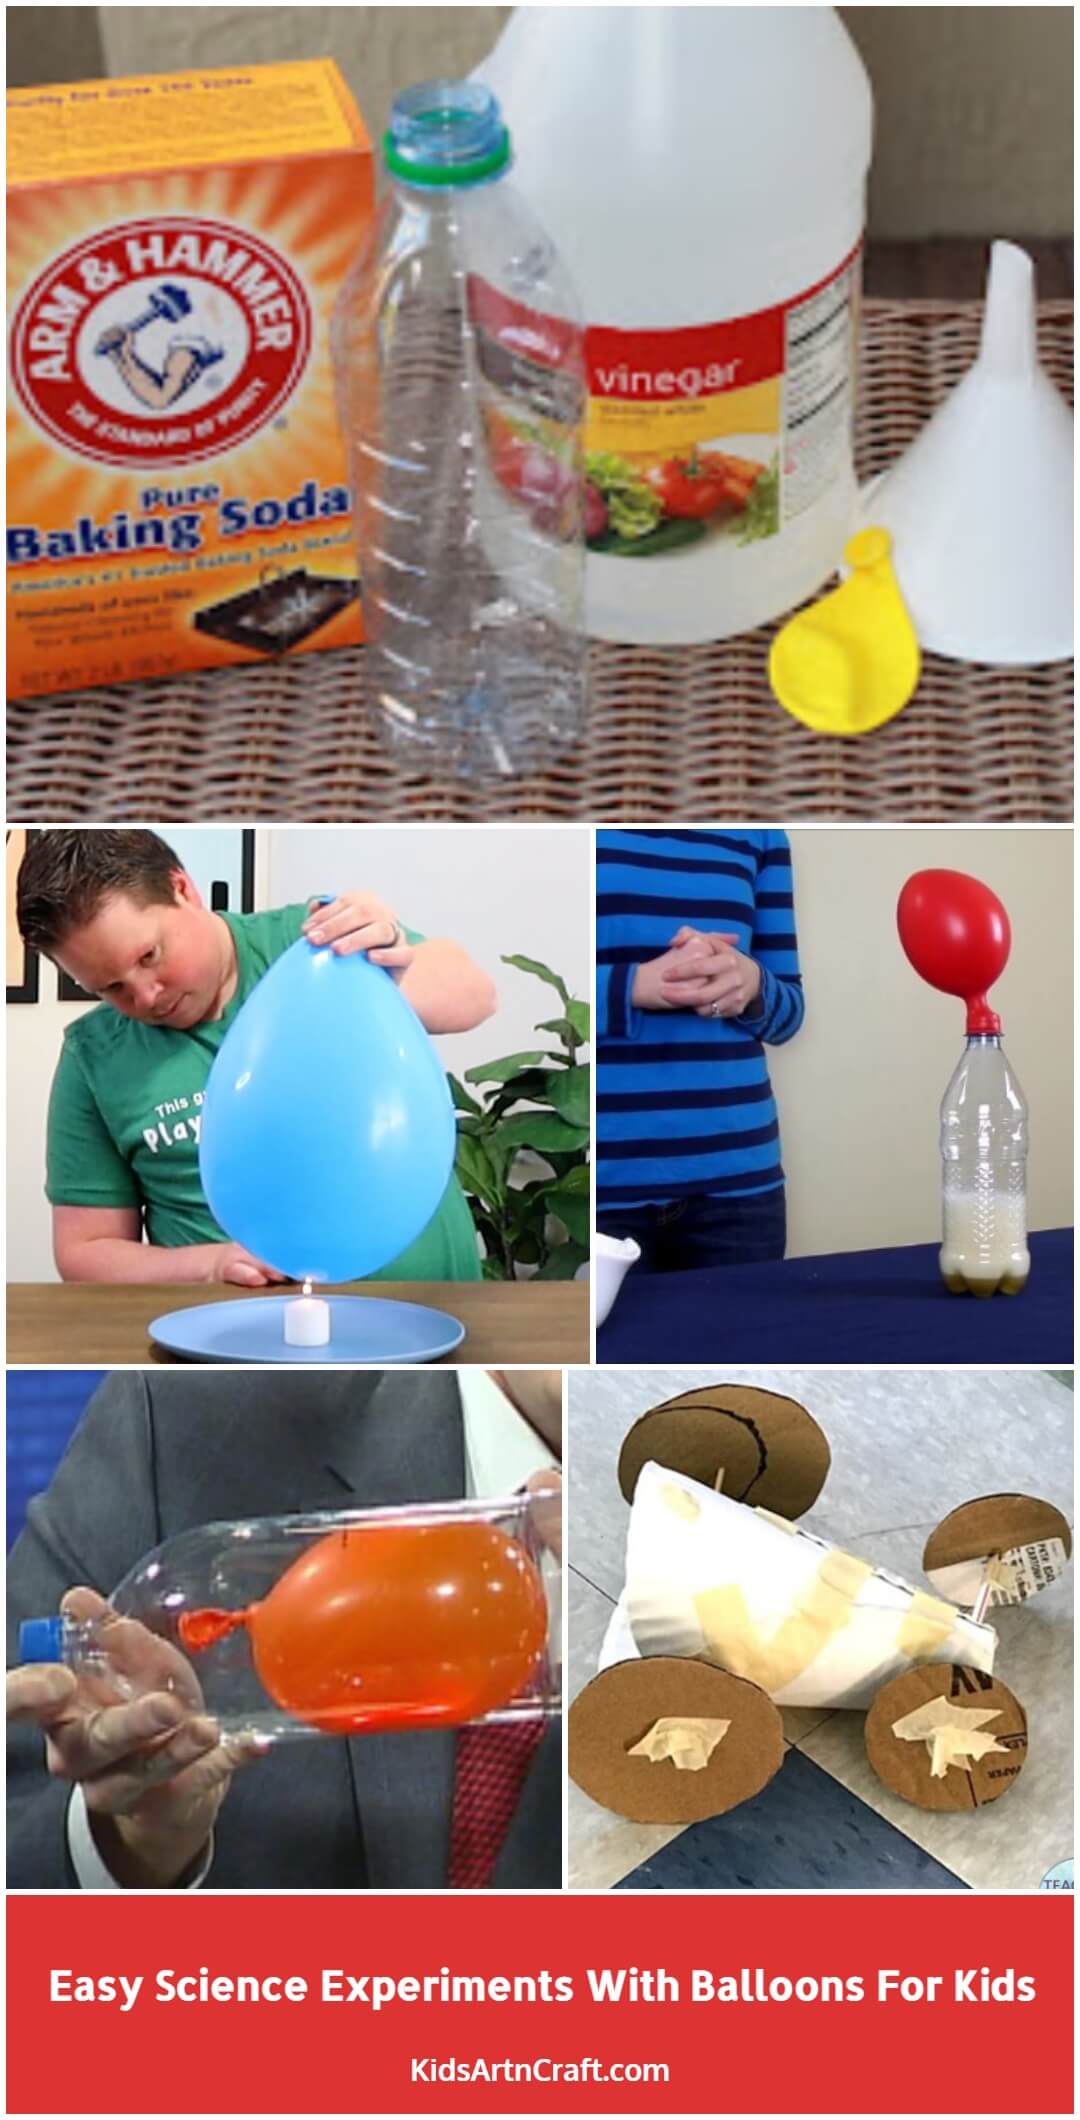 Easy Science Experiments With Balloons For Kids